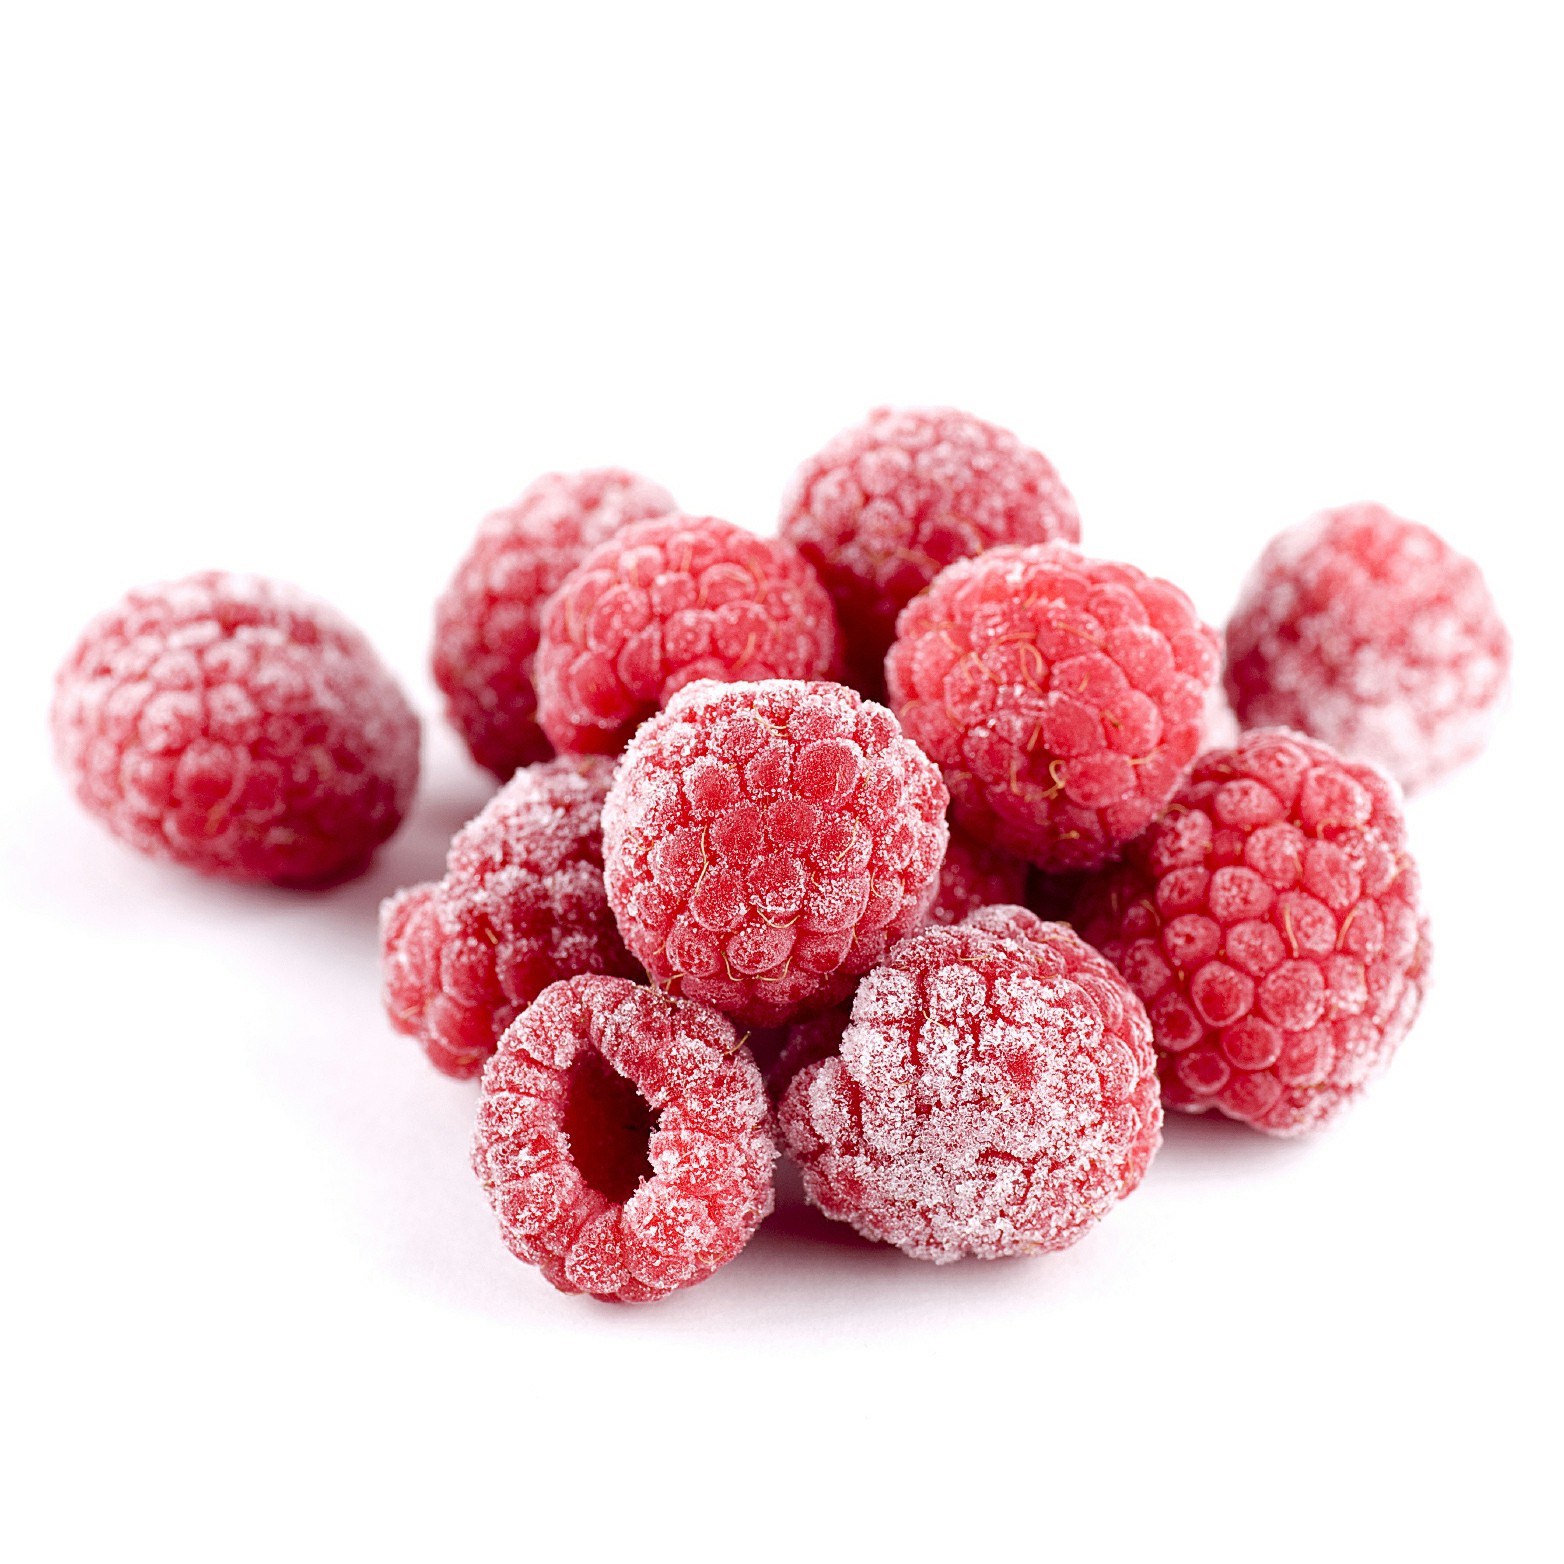 Frozen raspberry whole & crumbled